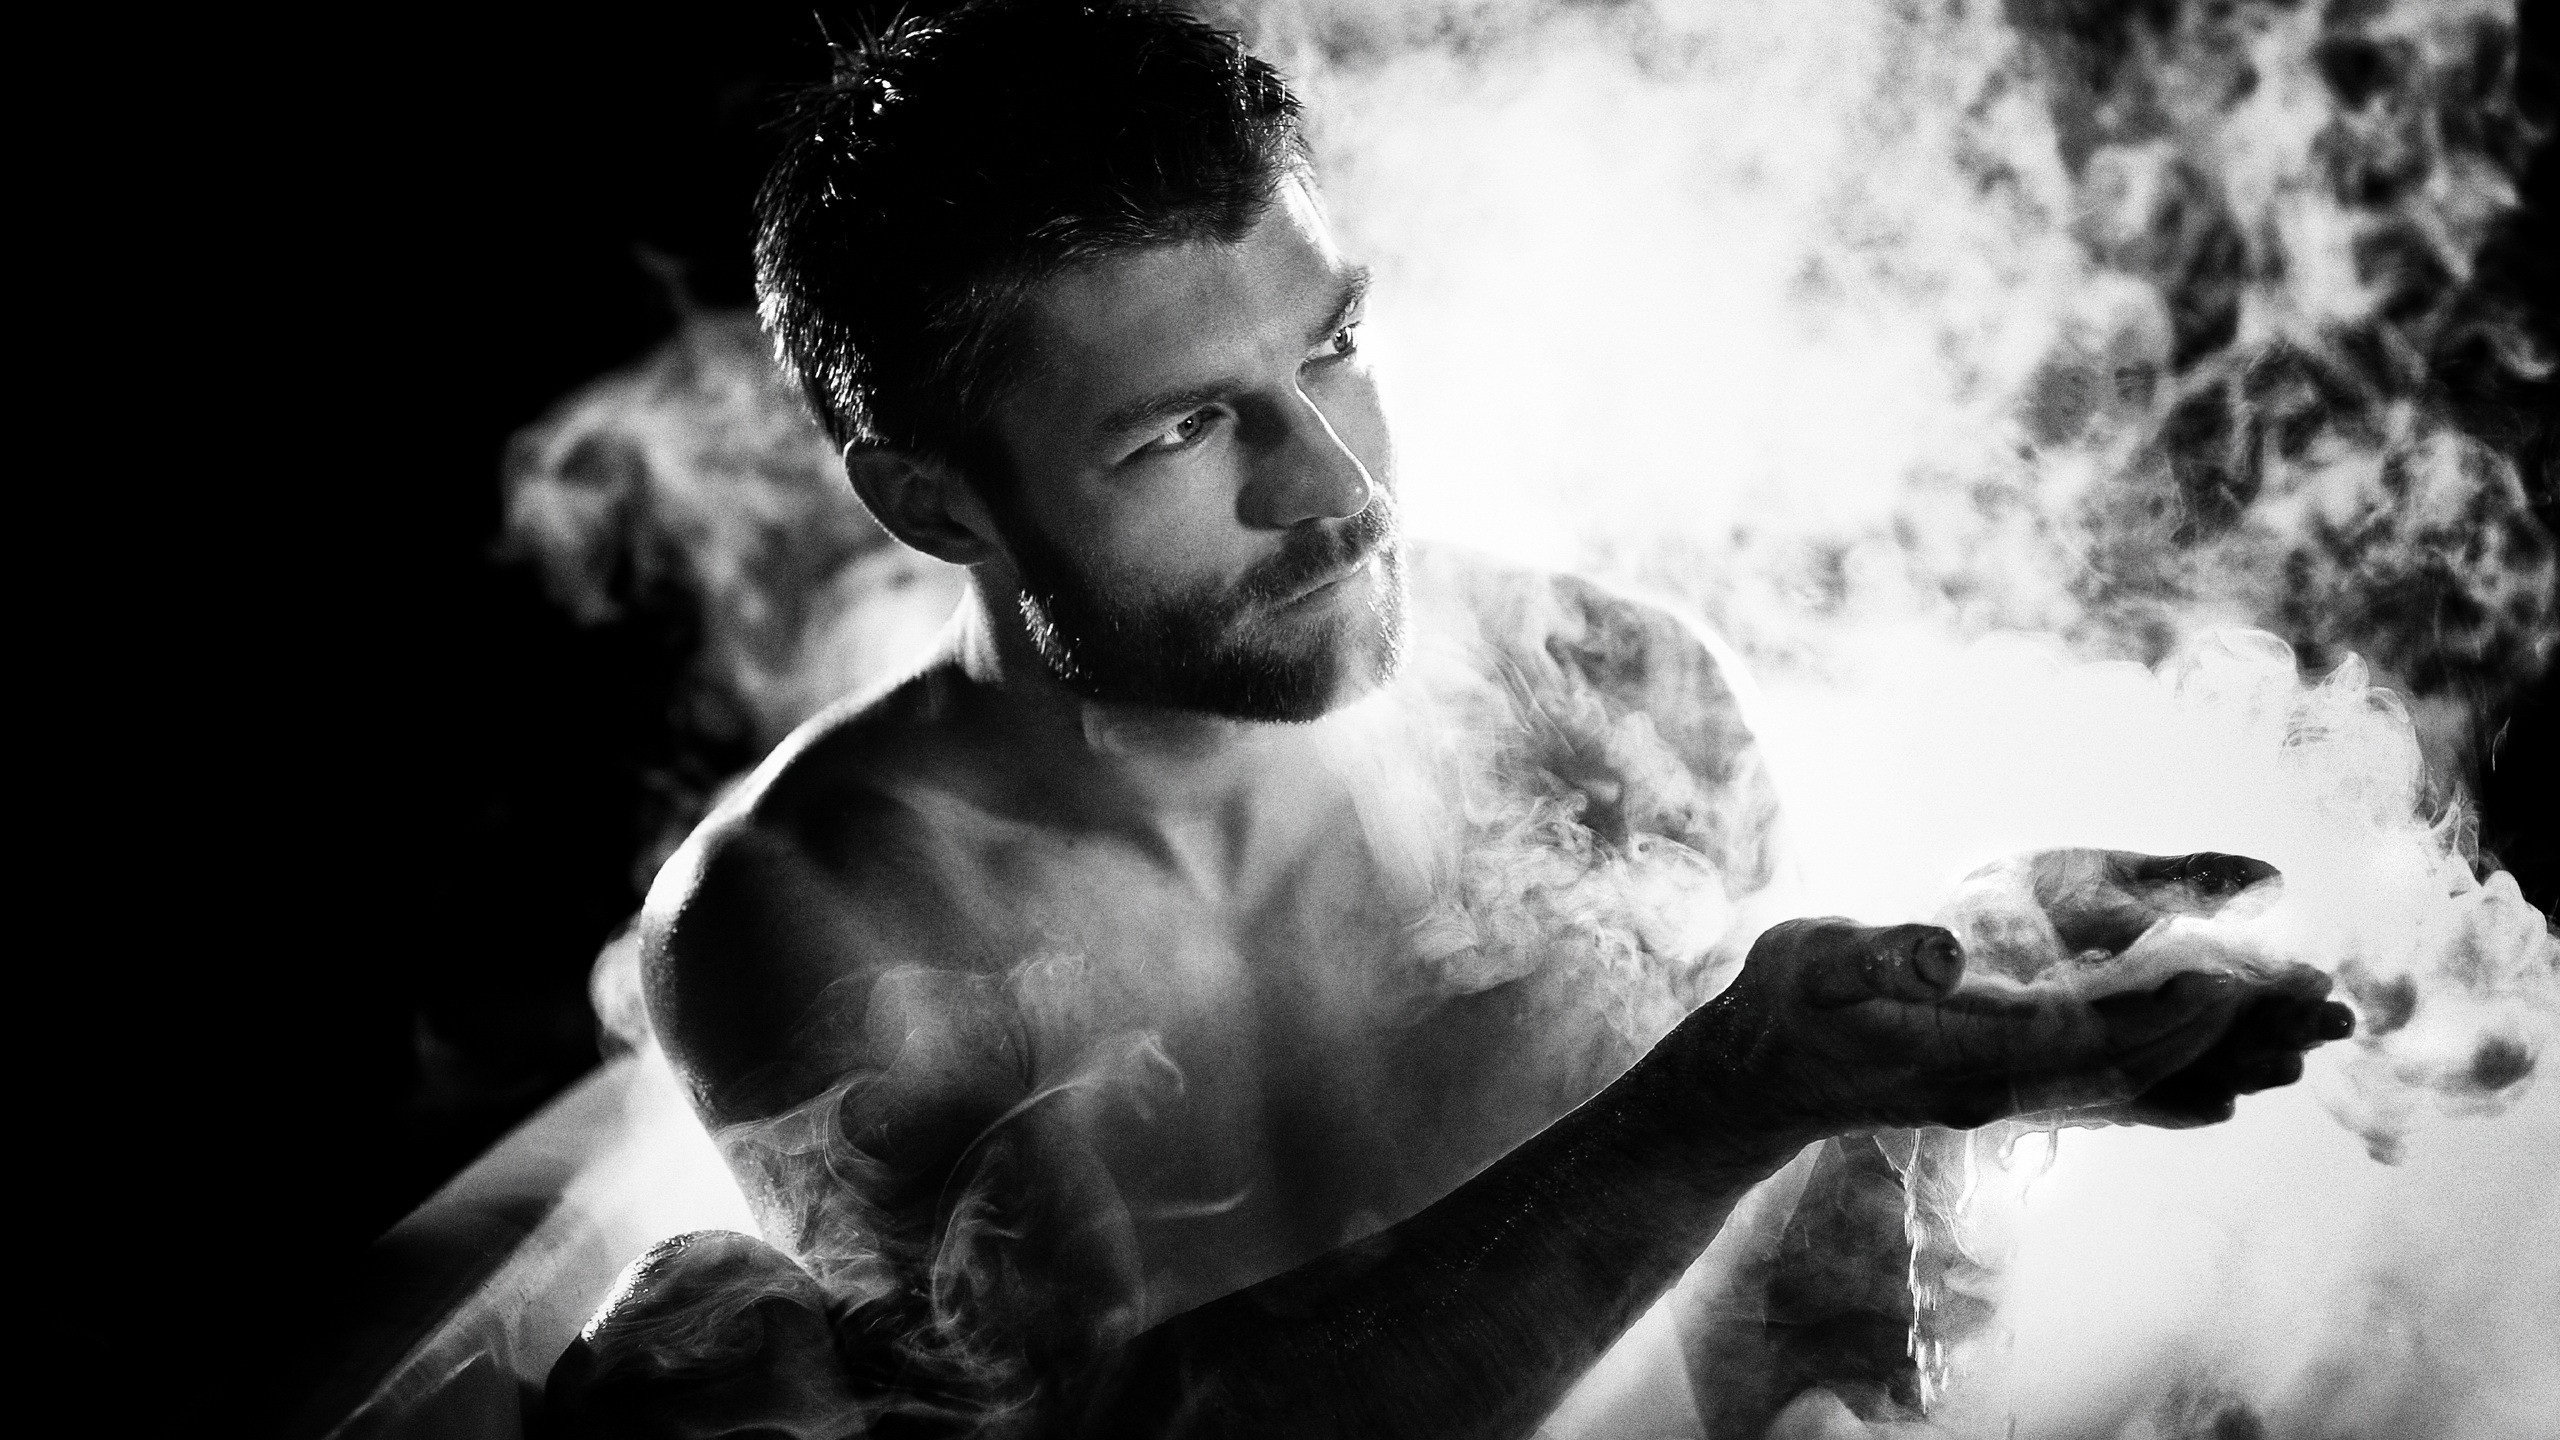 Liam McIntyre Spartacus for 2560x1440 HDTV resolution